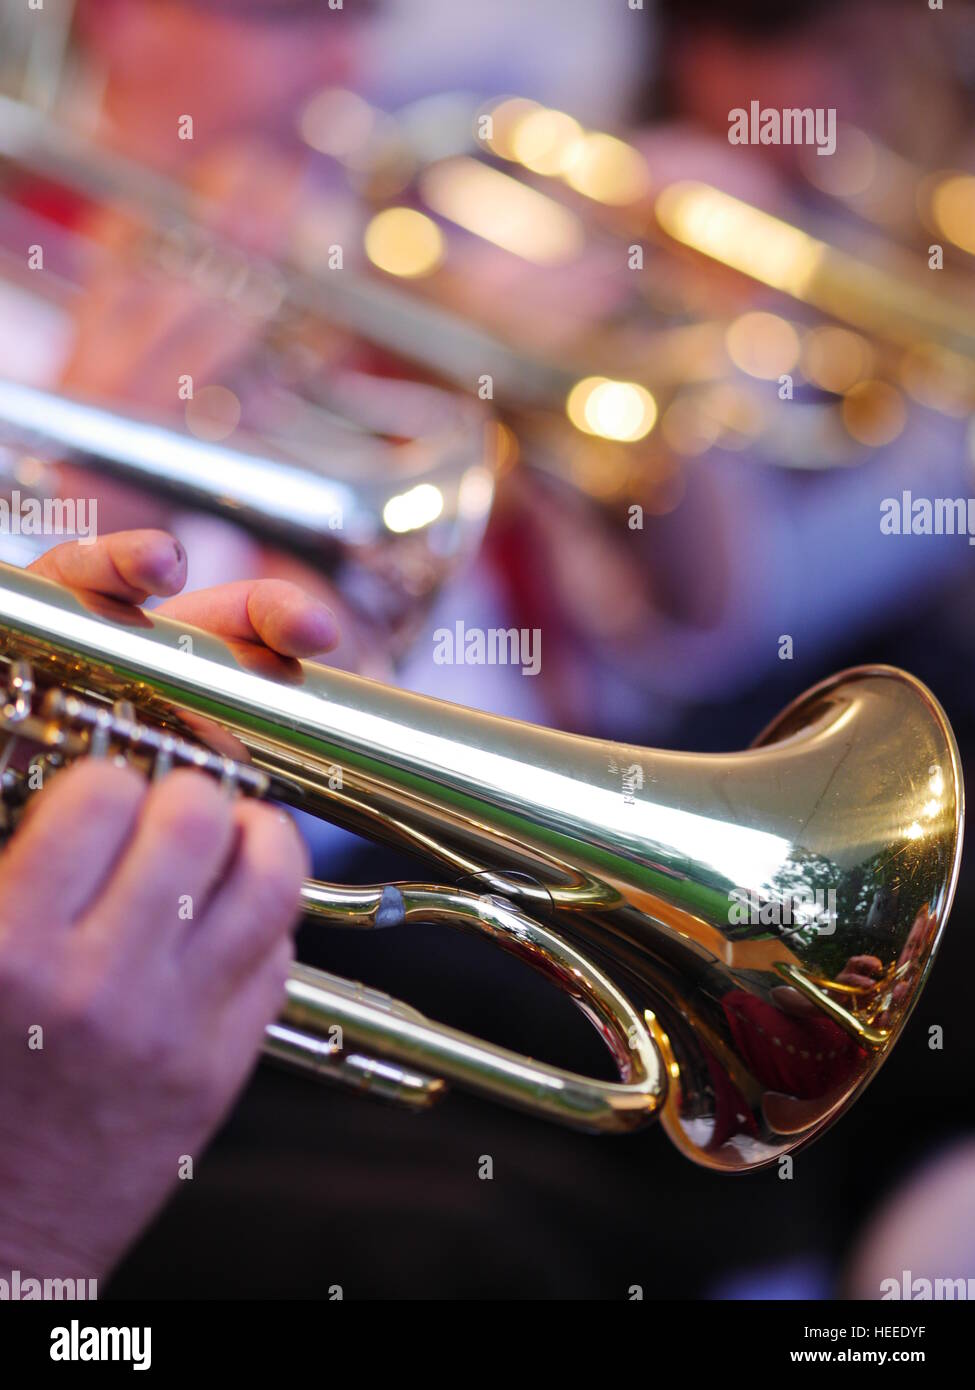 trumpet in the hand somebody Stock Photo